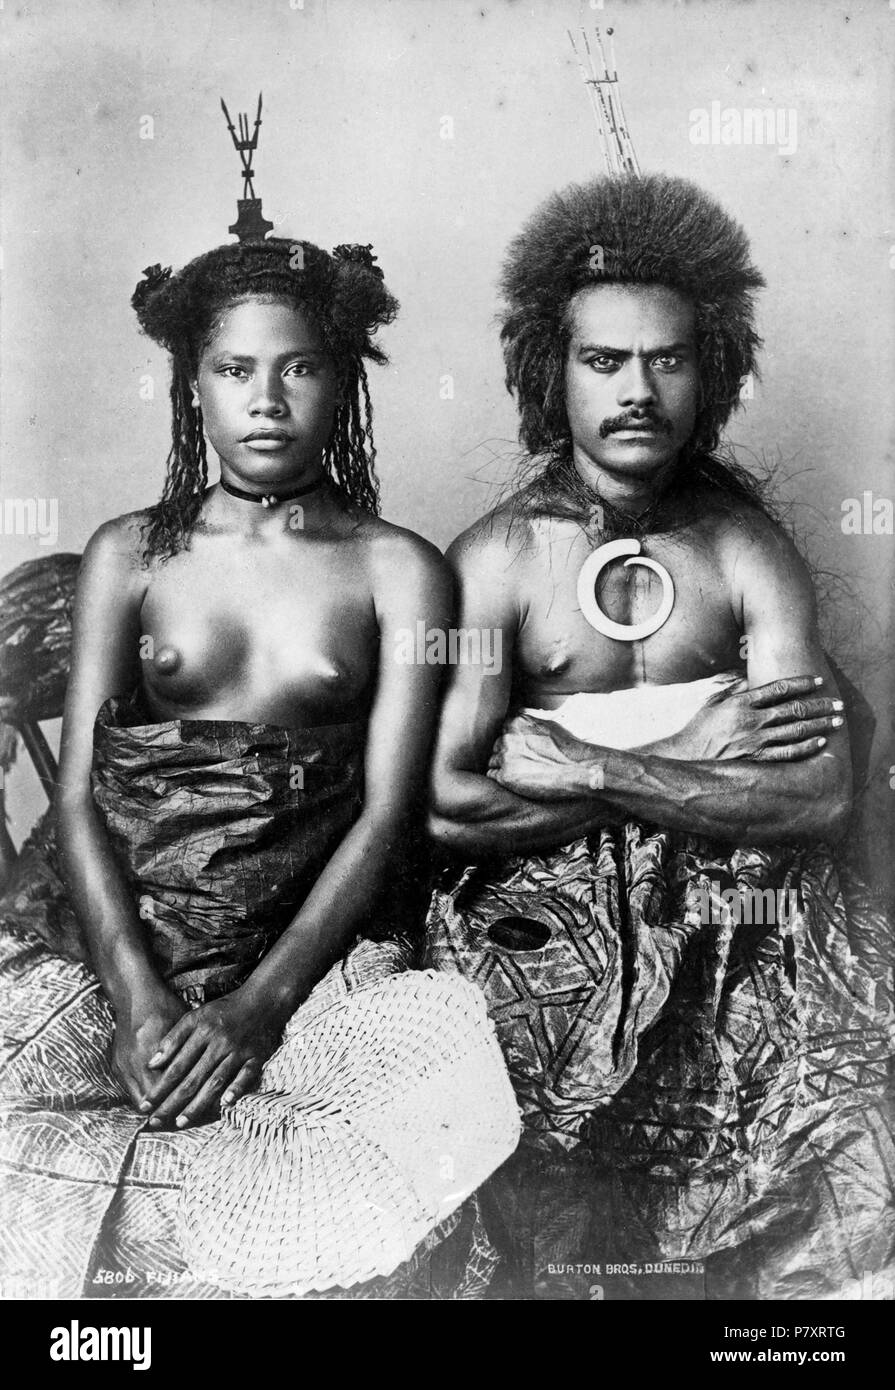 English: Seated portrait of a Fijian man and a Fijian woman. Both wear headpieces. Tapa cloths are draped over their legs. Photograph taken by Alfred Burton in 1884. 1884 159 Fijian man and woman, 1884 Stock Photo